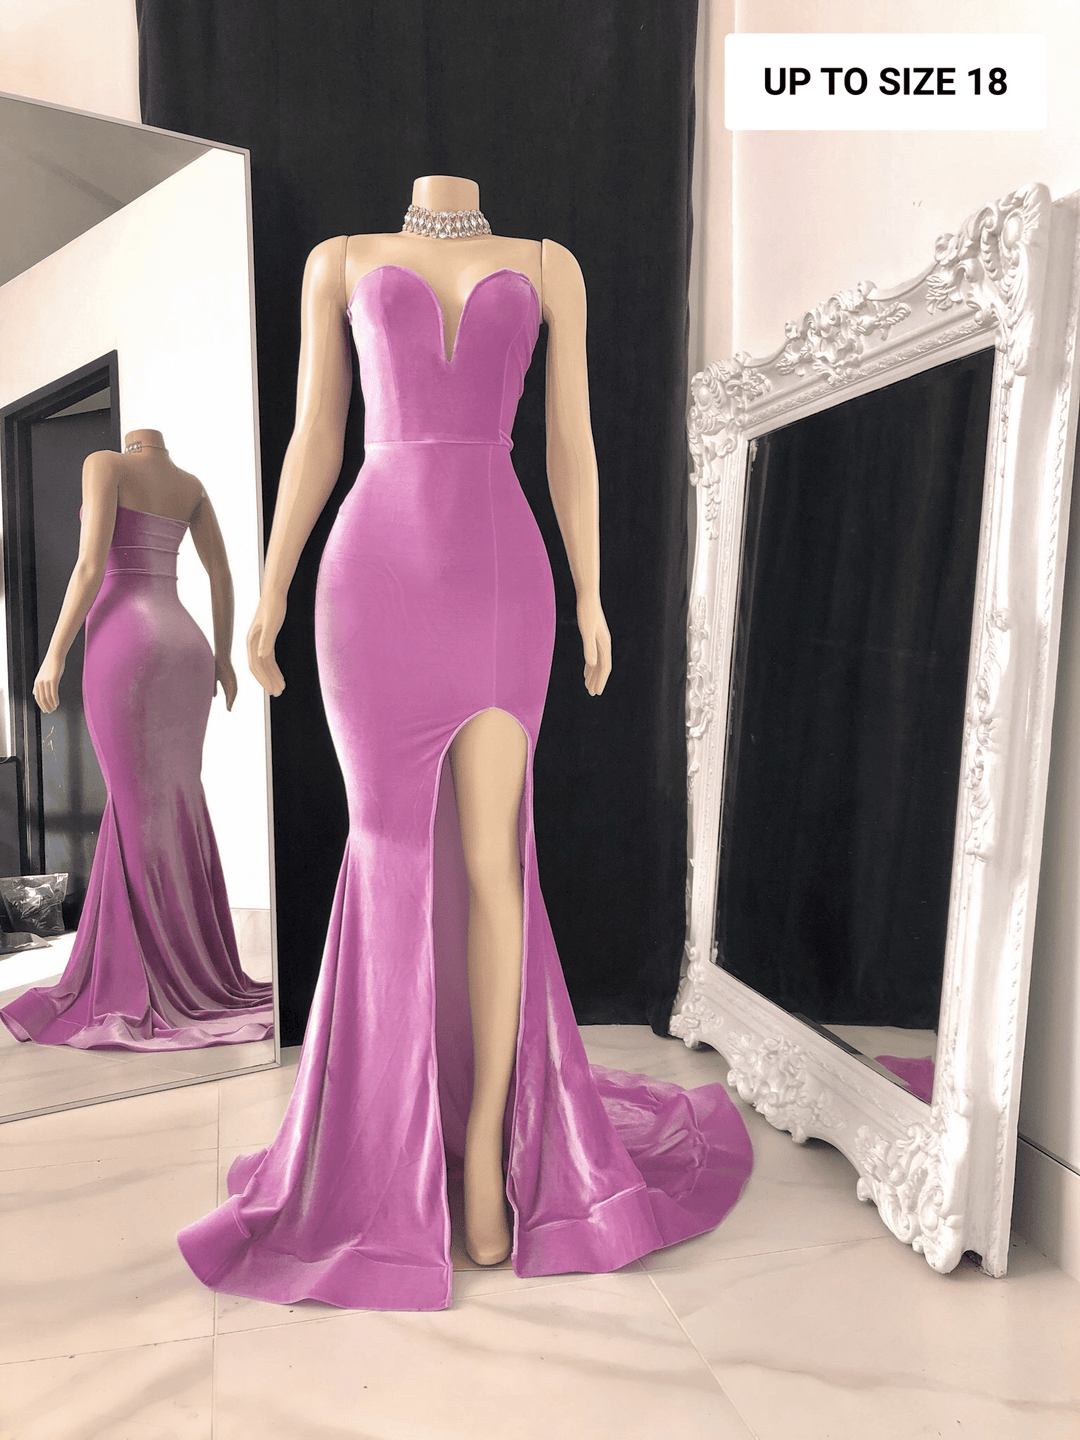 The CHELSEA Gown